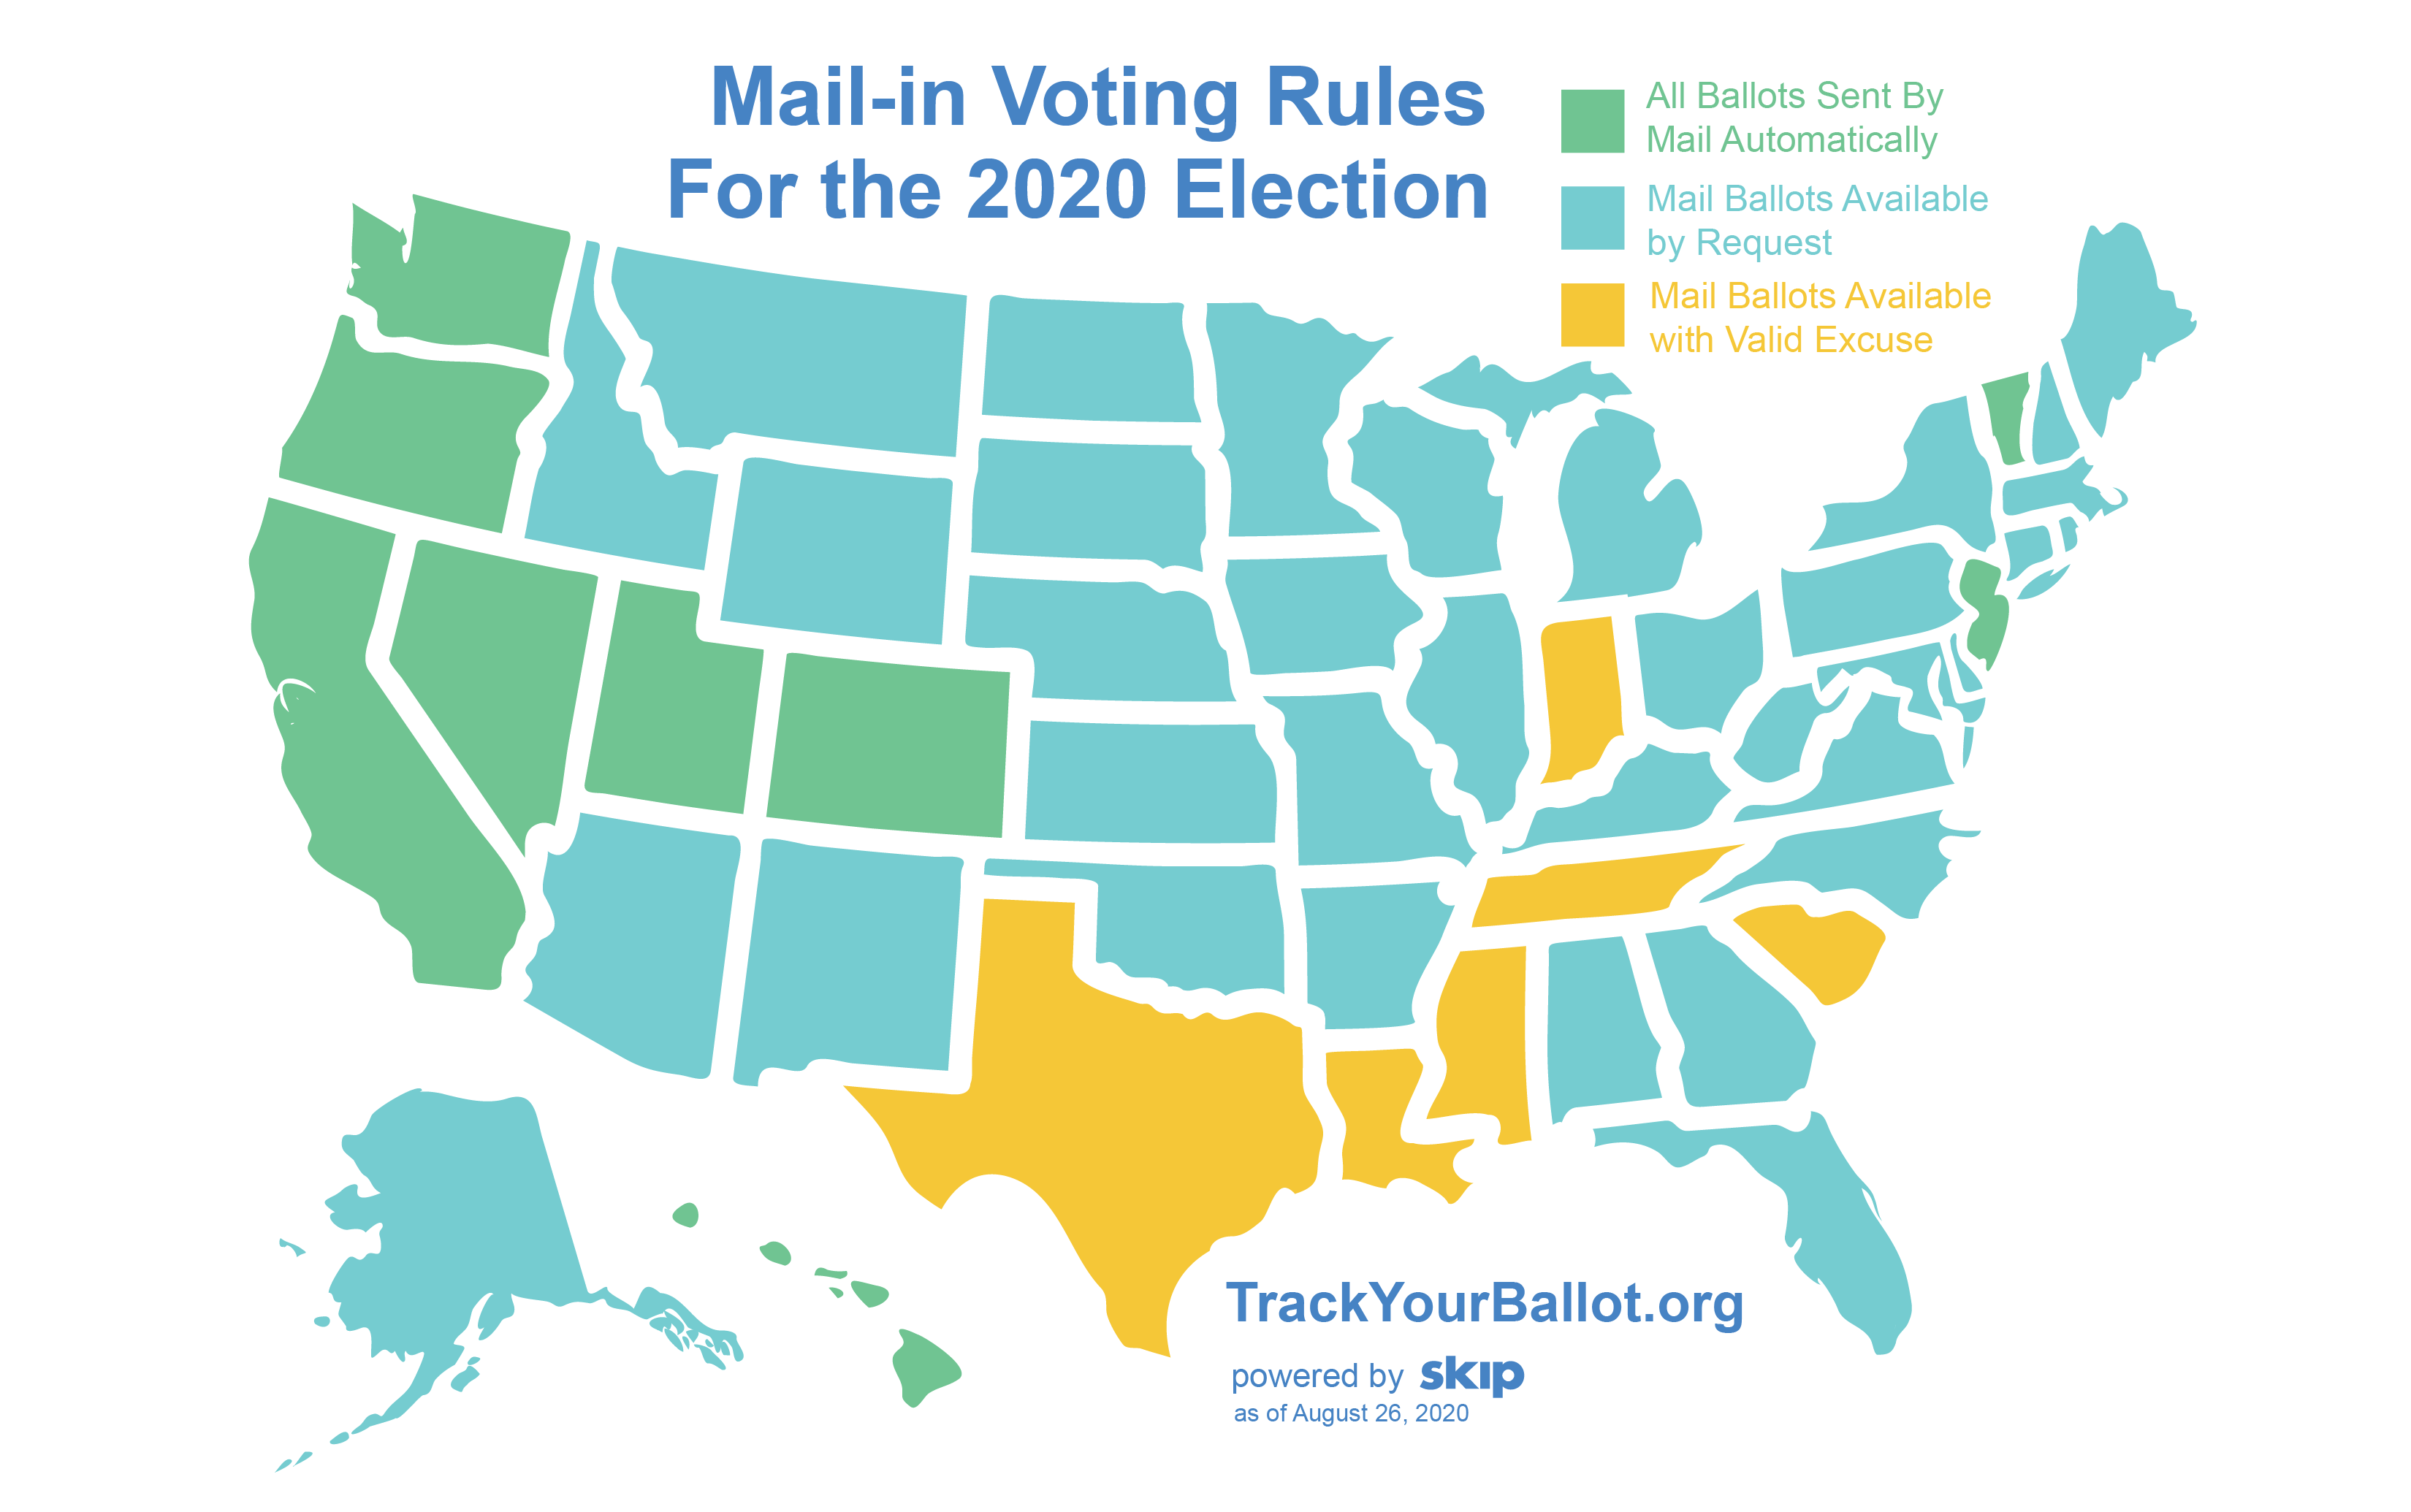 https://ghost.helloskip.com/blog/content/images/2020/09/US-2020-Elections-Mail-in-Voting-Map---as-of-August-2020-01.png